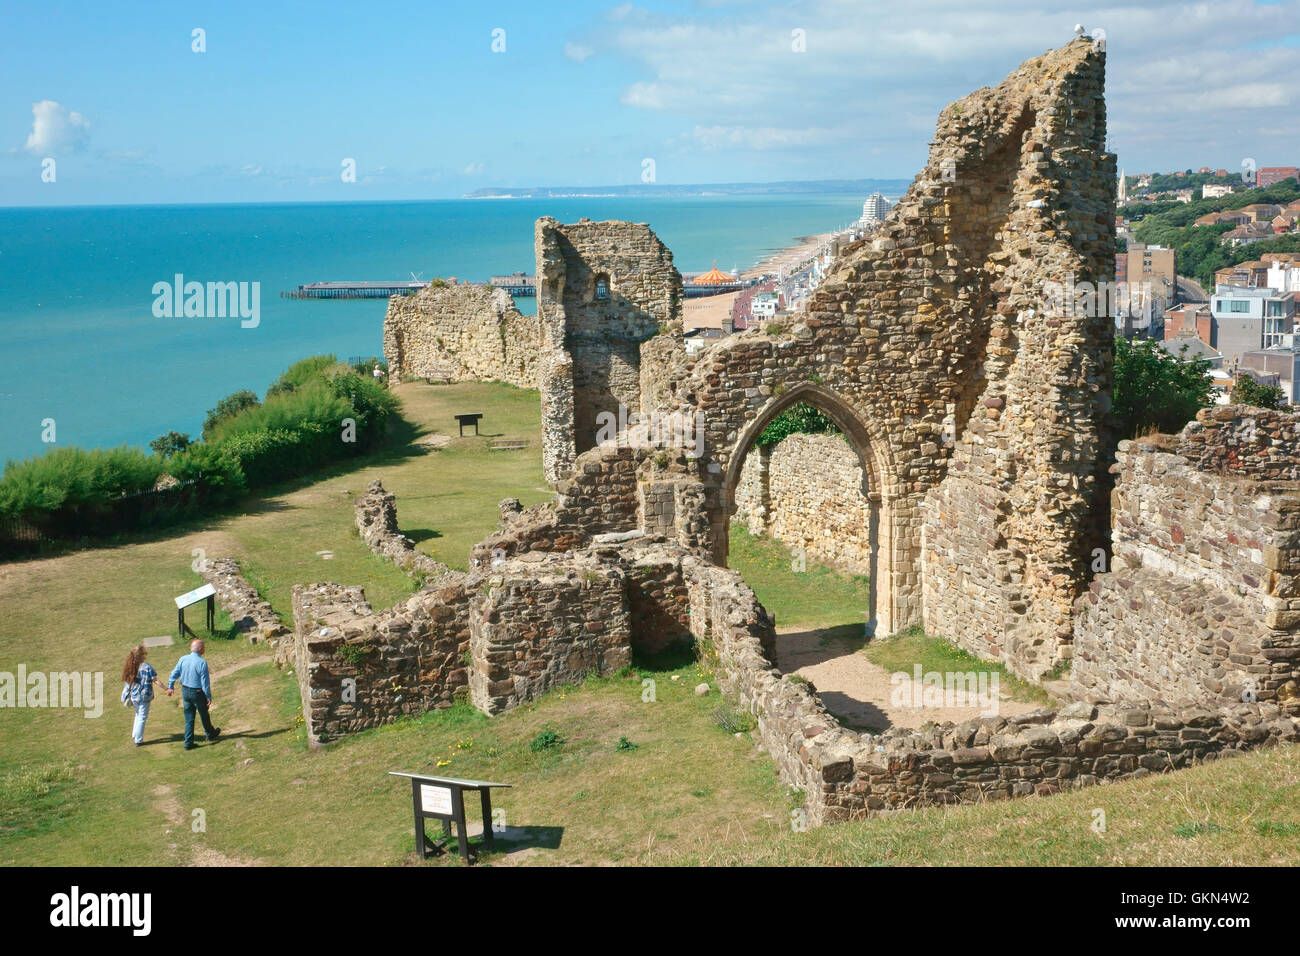 Hastings Castle ruins, built after the Norman Conquest of 1066, on the clifftop at Hastings, East Sussex, England, UK Britain GB Stock Photo